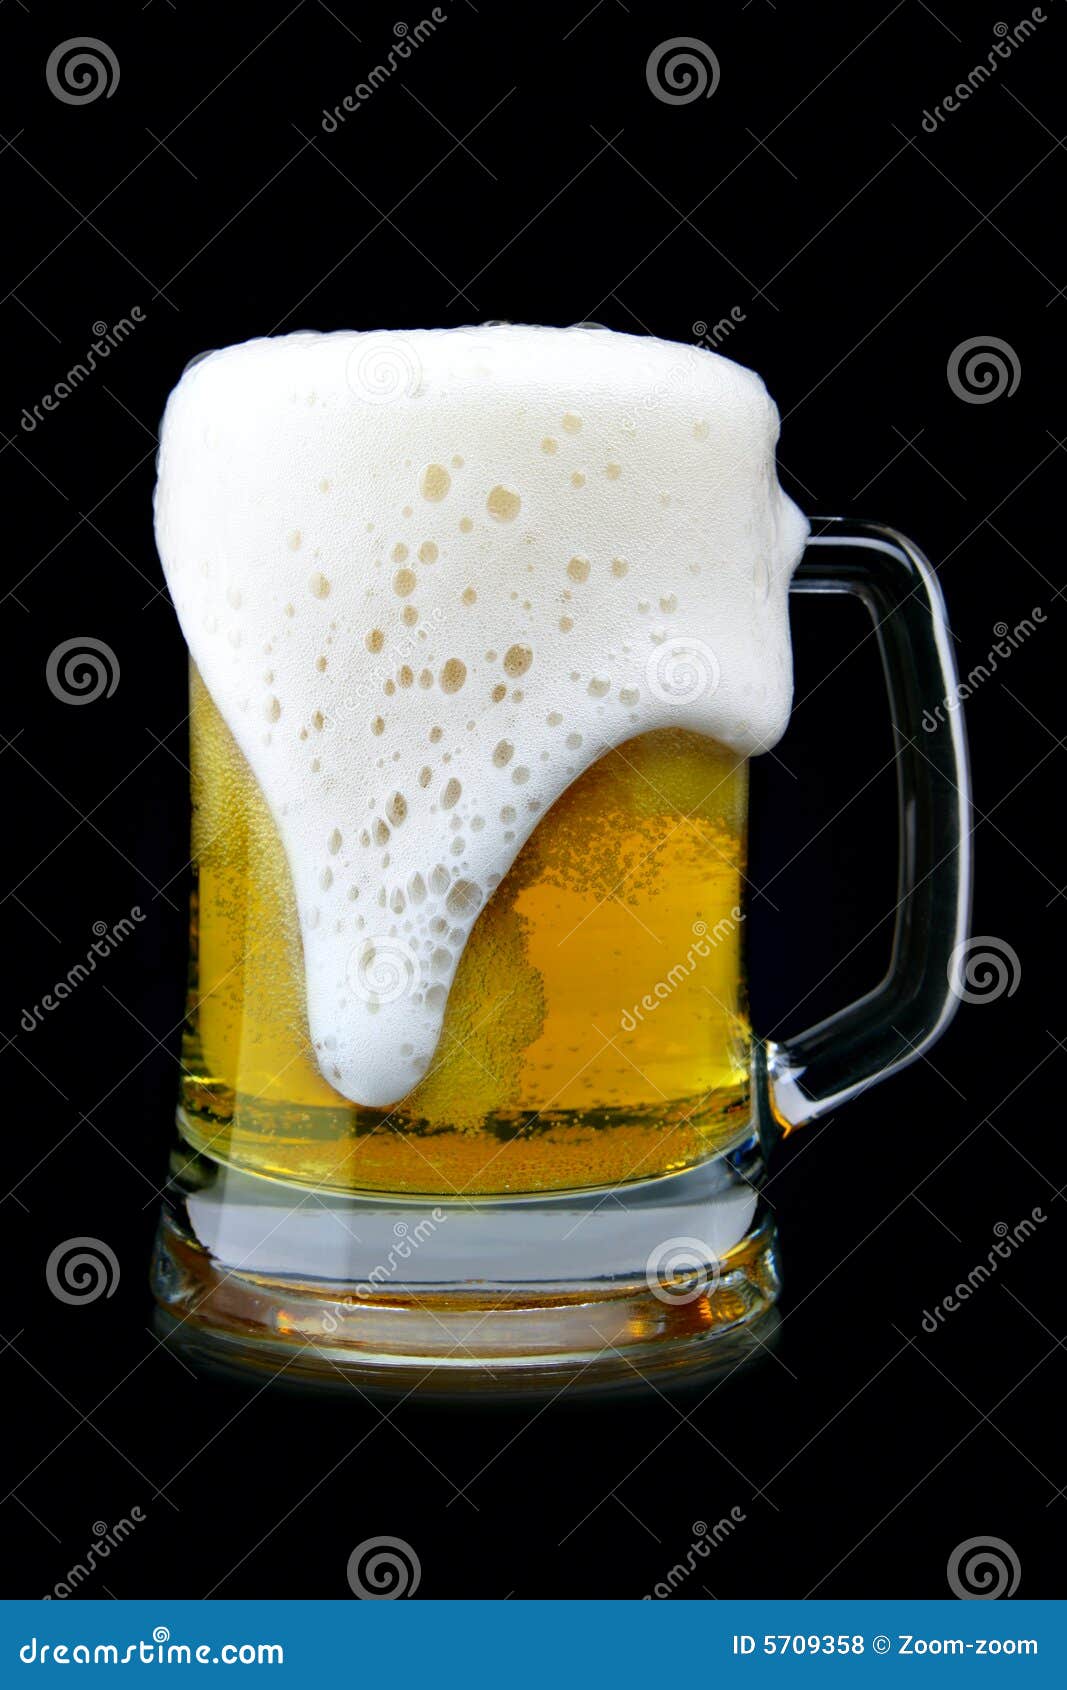 mug of beer with froth